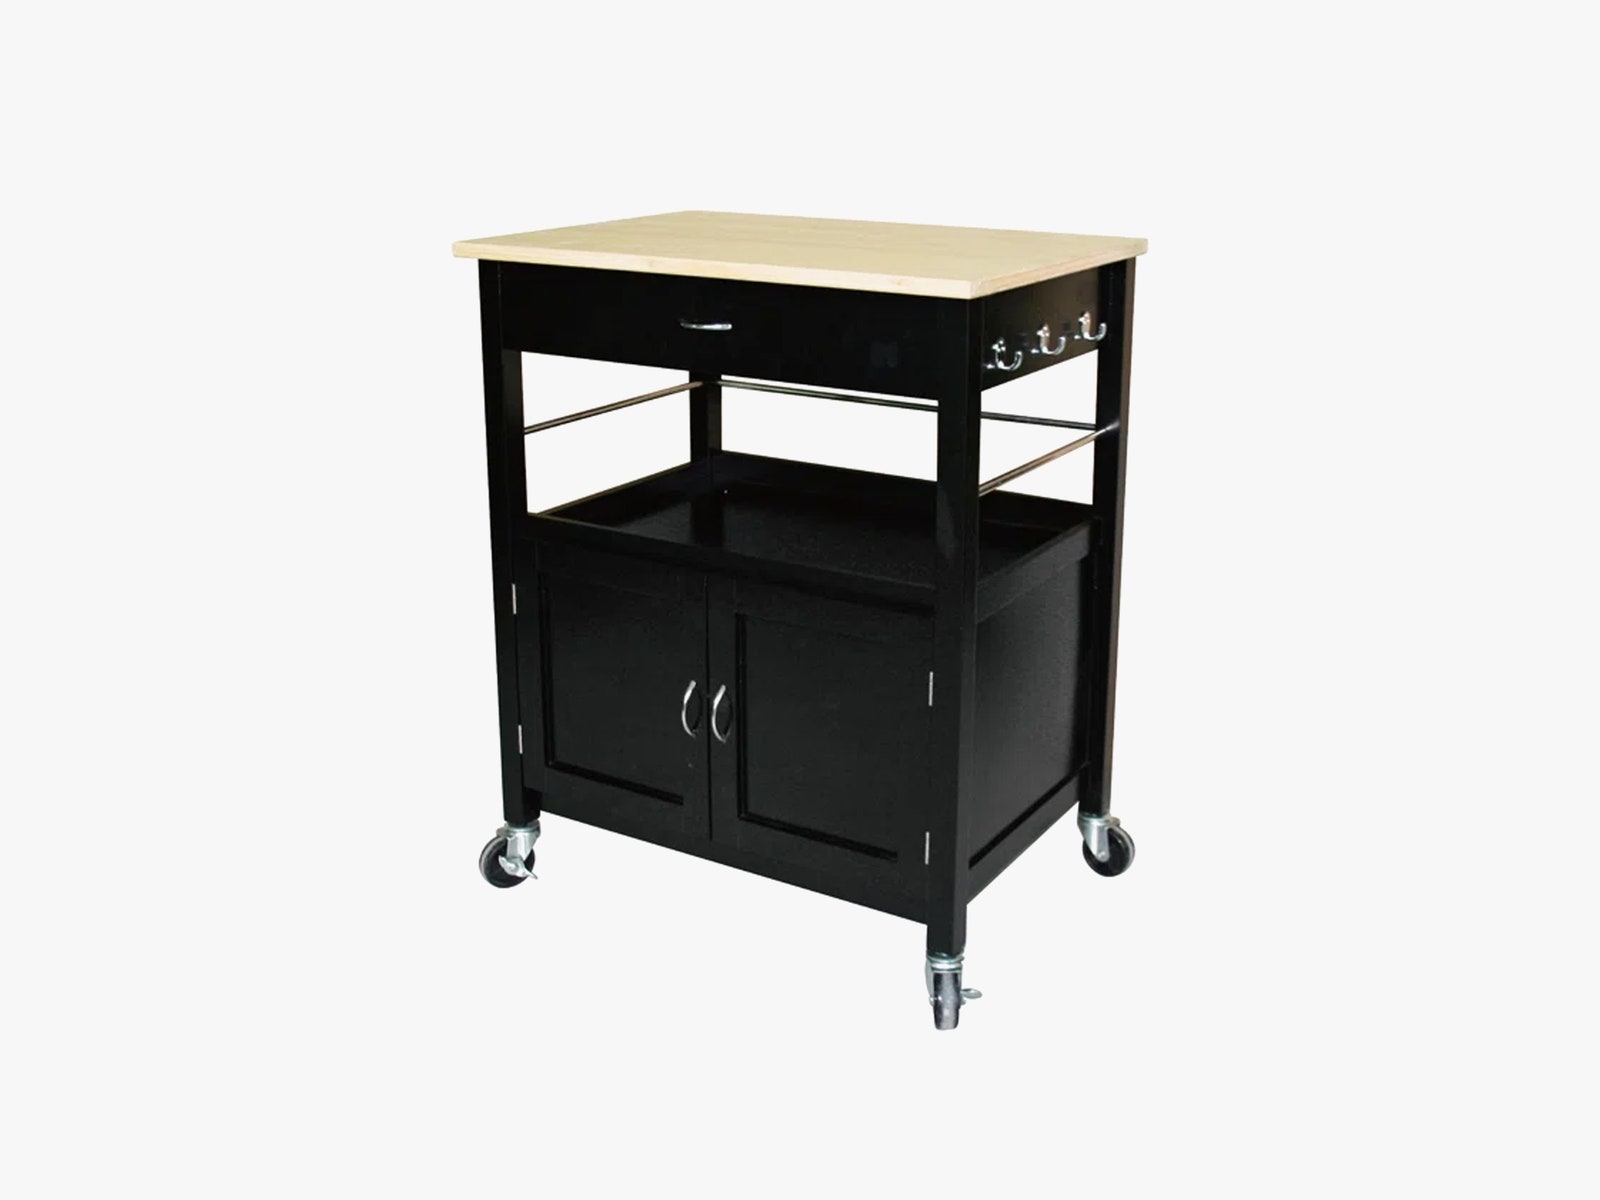 A small black 2 tier cart on 4 wheels with a flat surface on top open shelving in the middle and a closed cabinet below